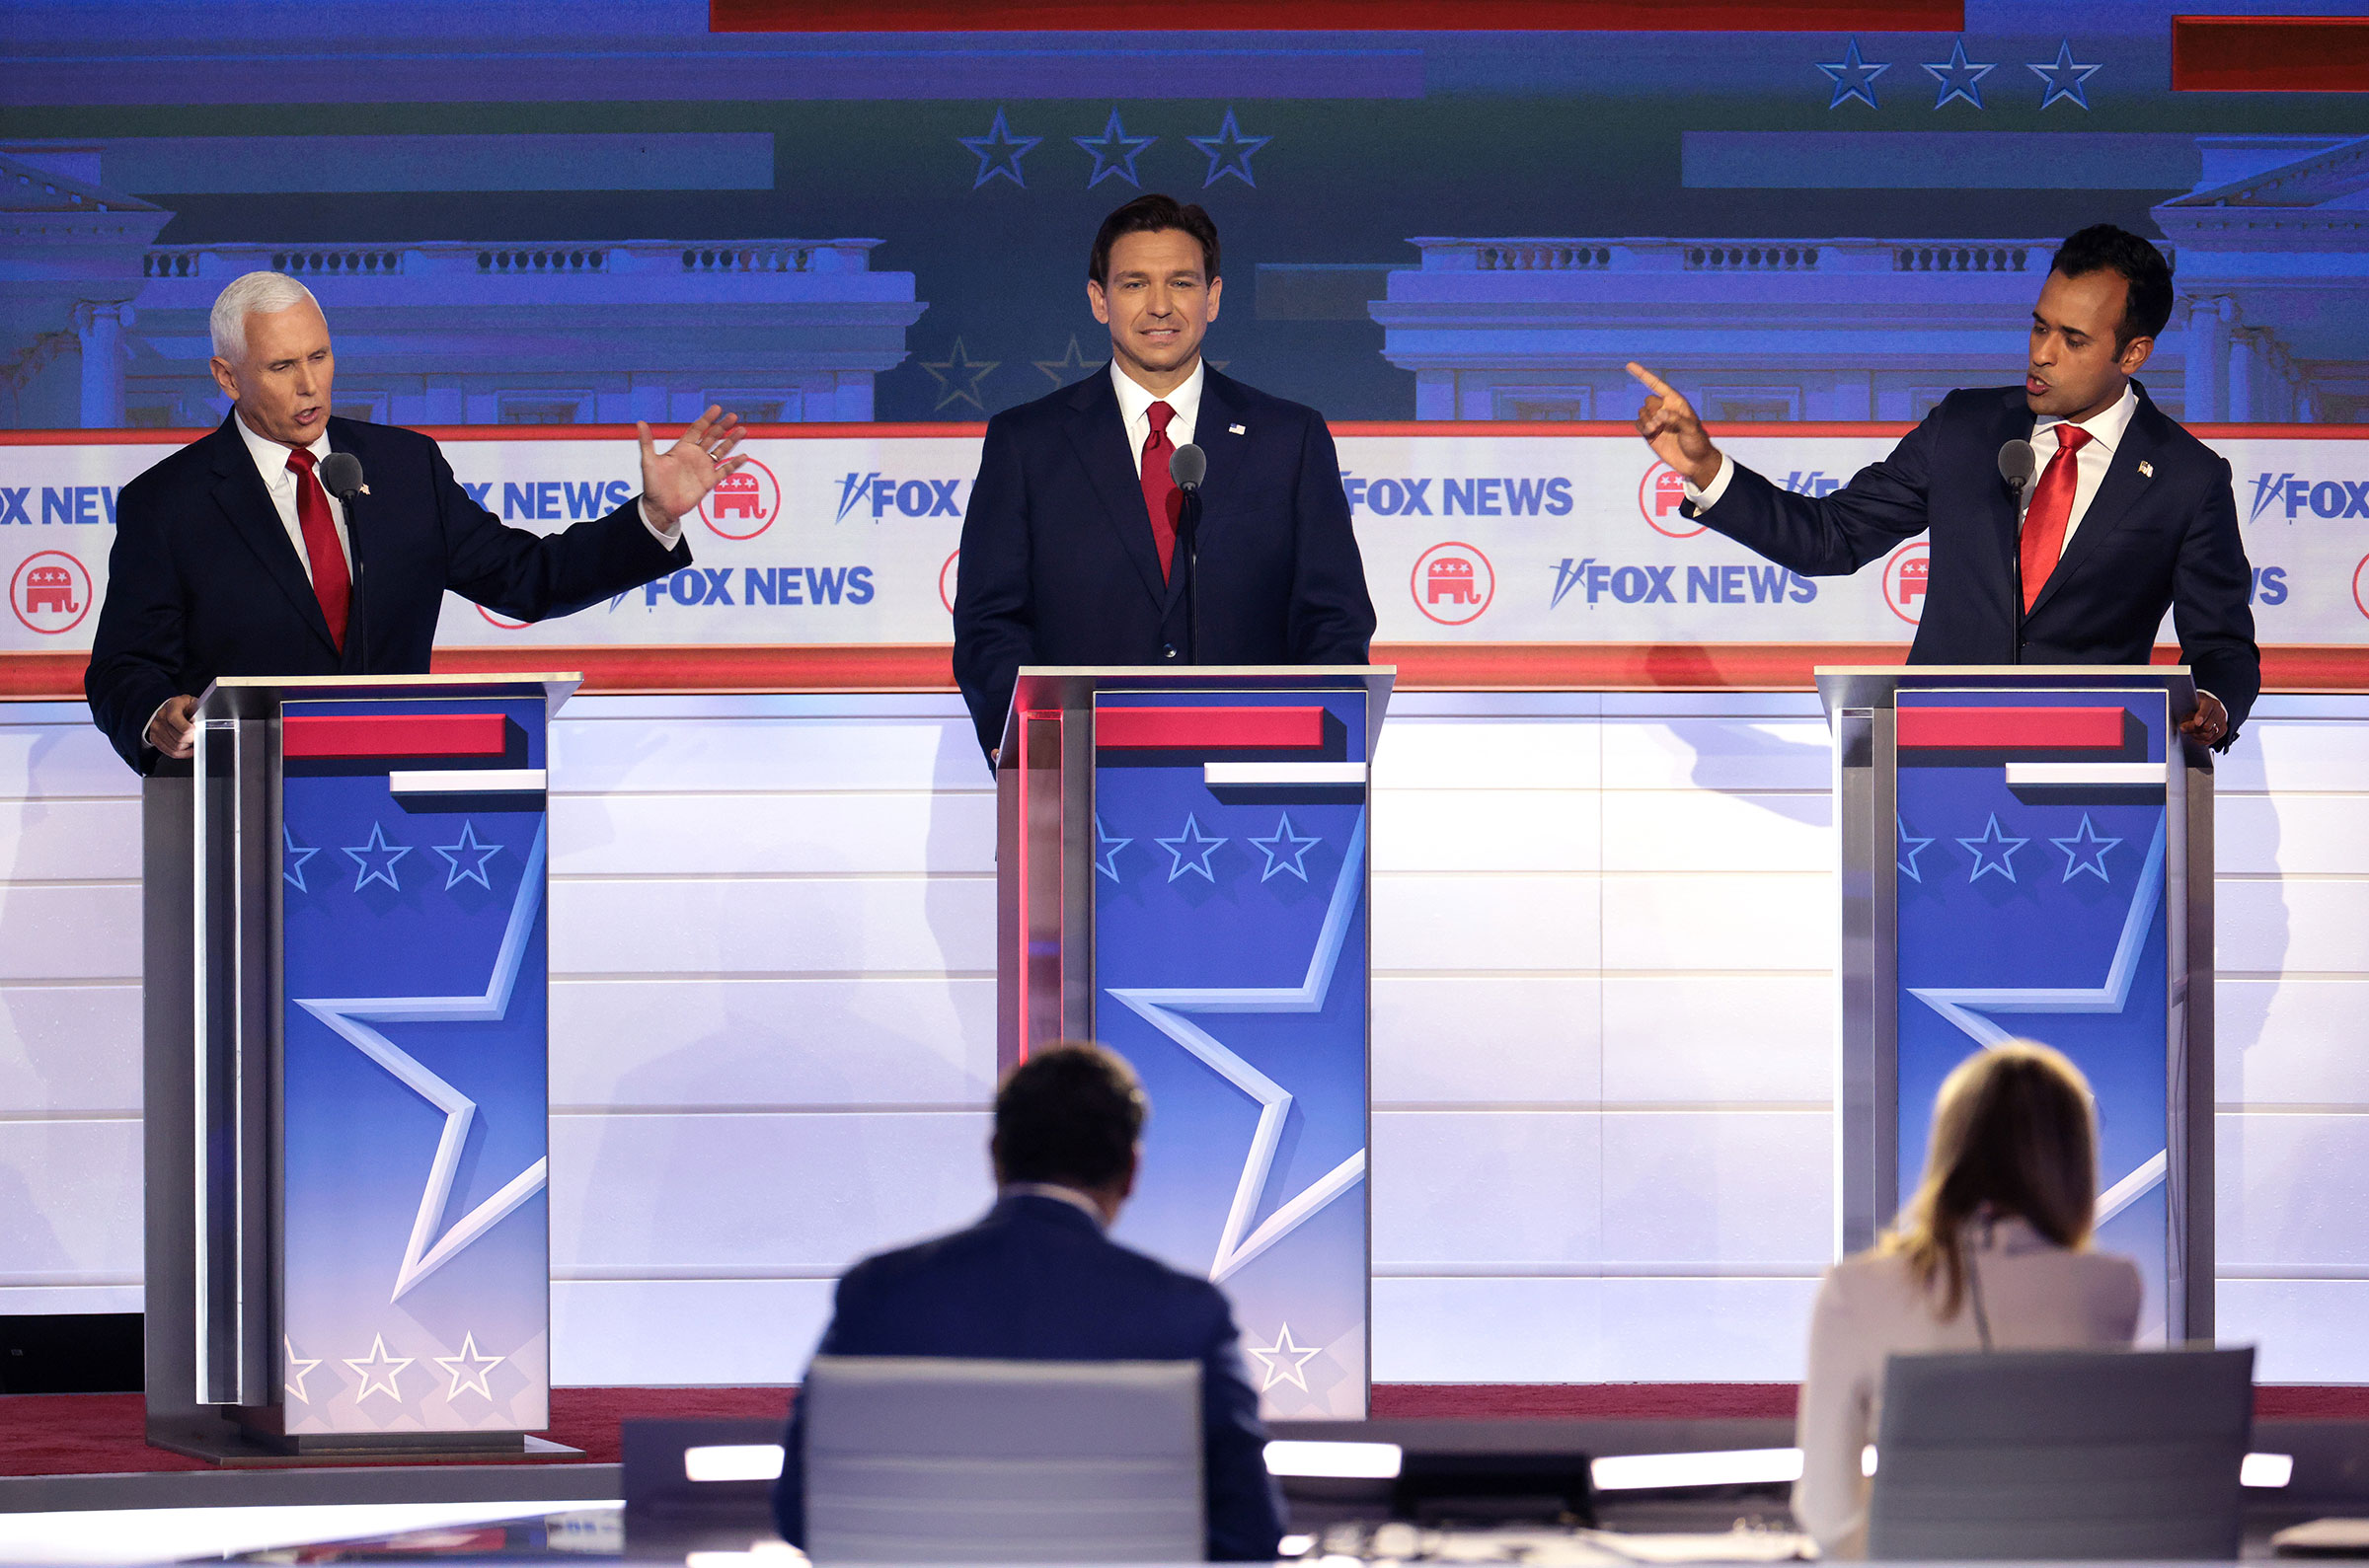 Republican presidential candidates, former Vice President Mike Pence, Florida Gov. Ron DeSantis and Vivek Ramaswamy participate in the first debate of the GOP primary season in Milwaukee, Wis. on Aug. 23.